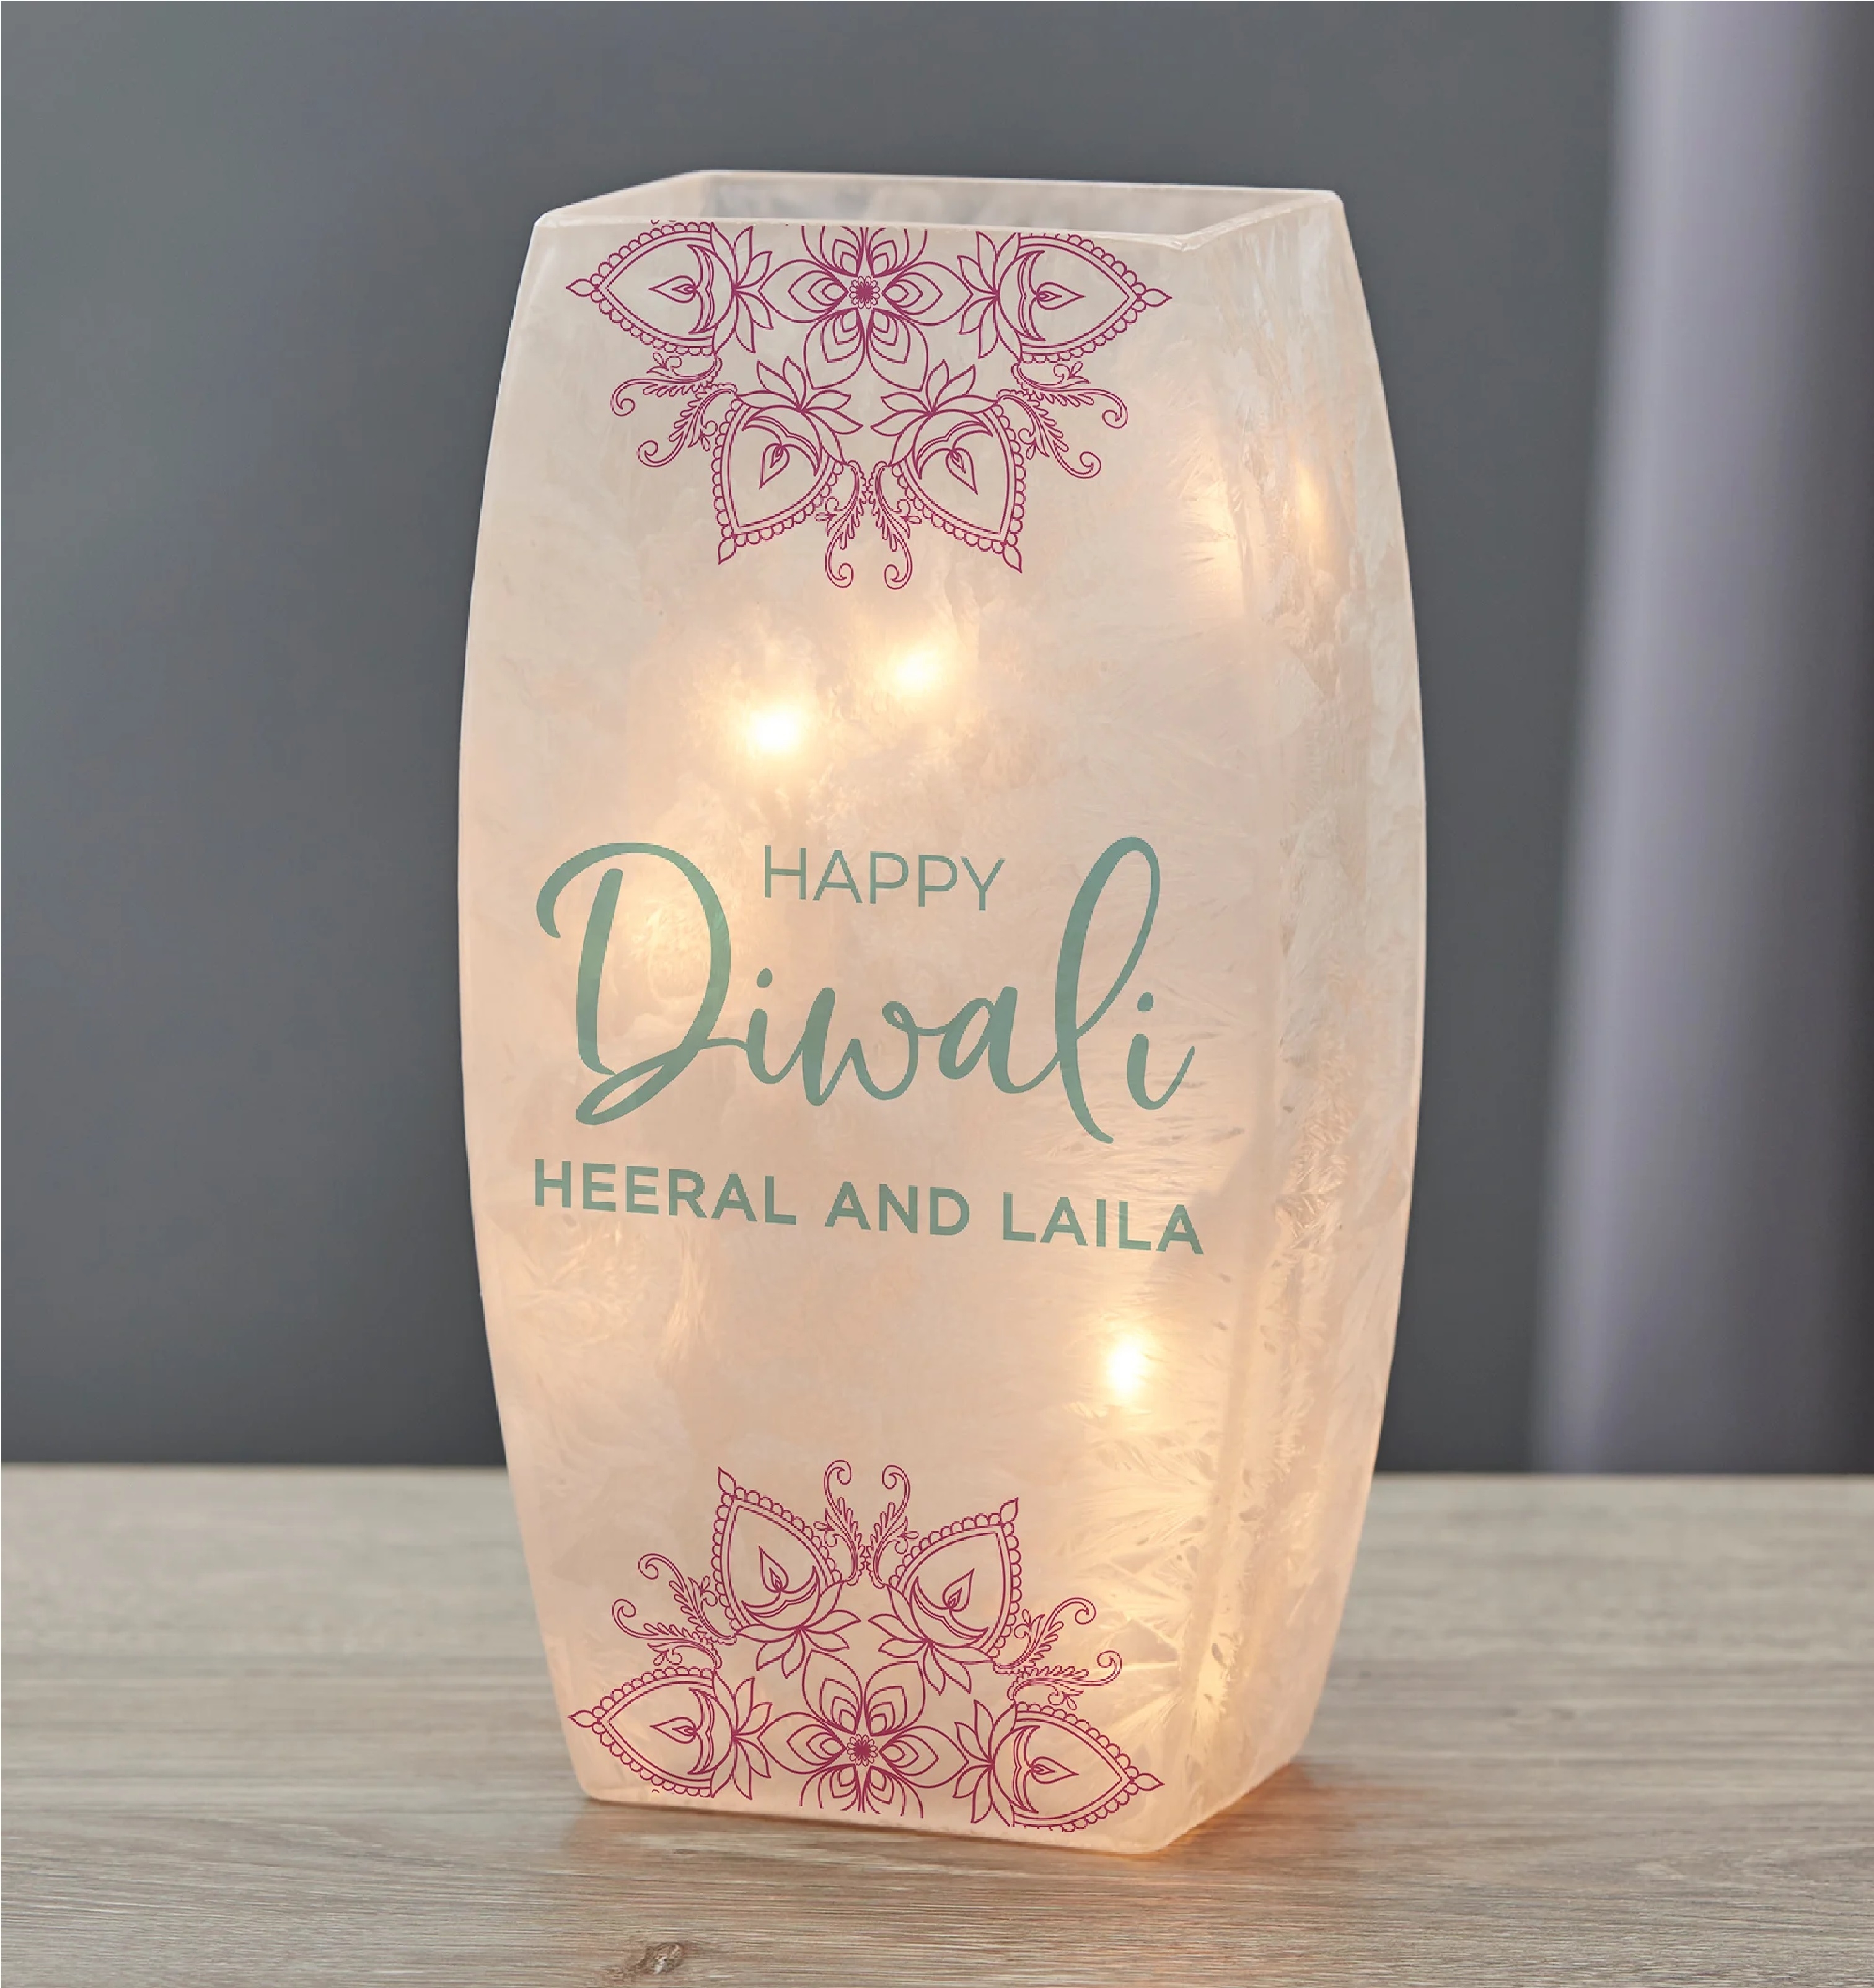 Diwali Personalized Frosted Shelf Decor- Small